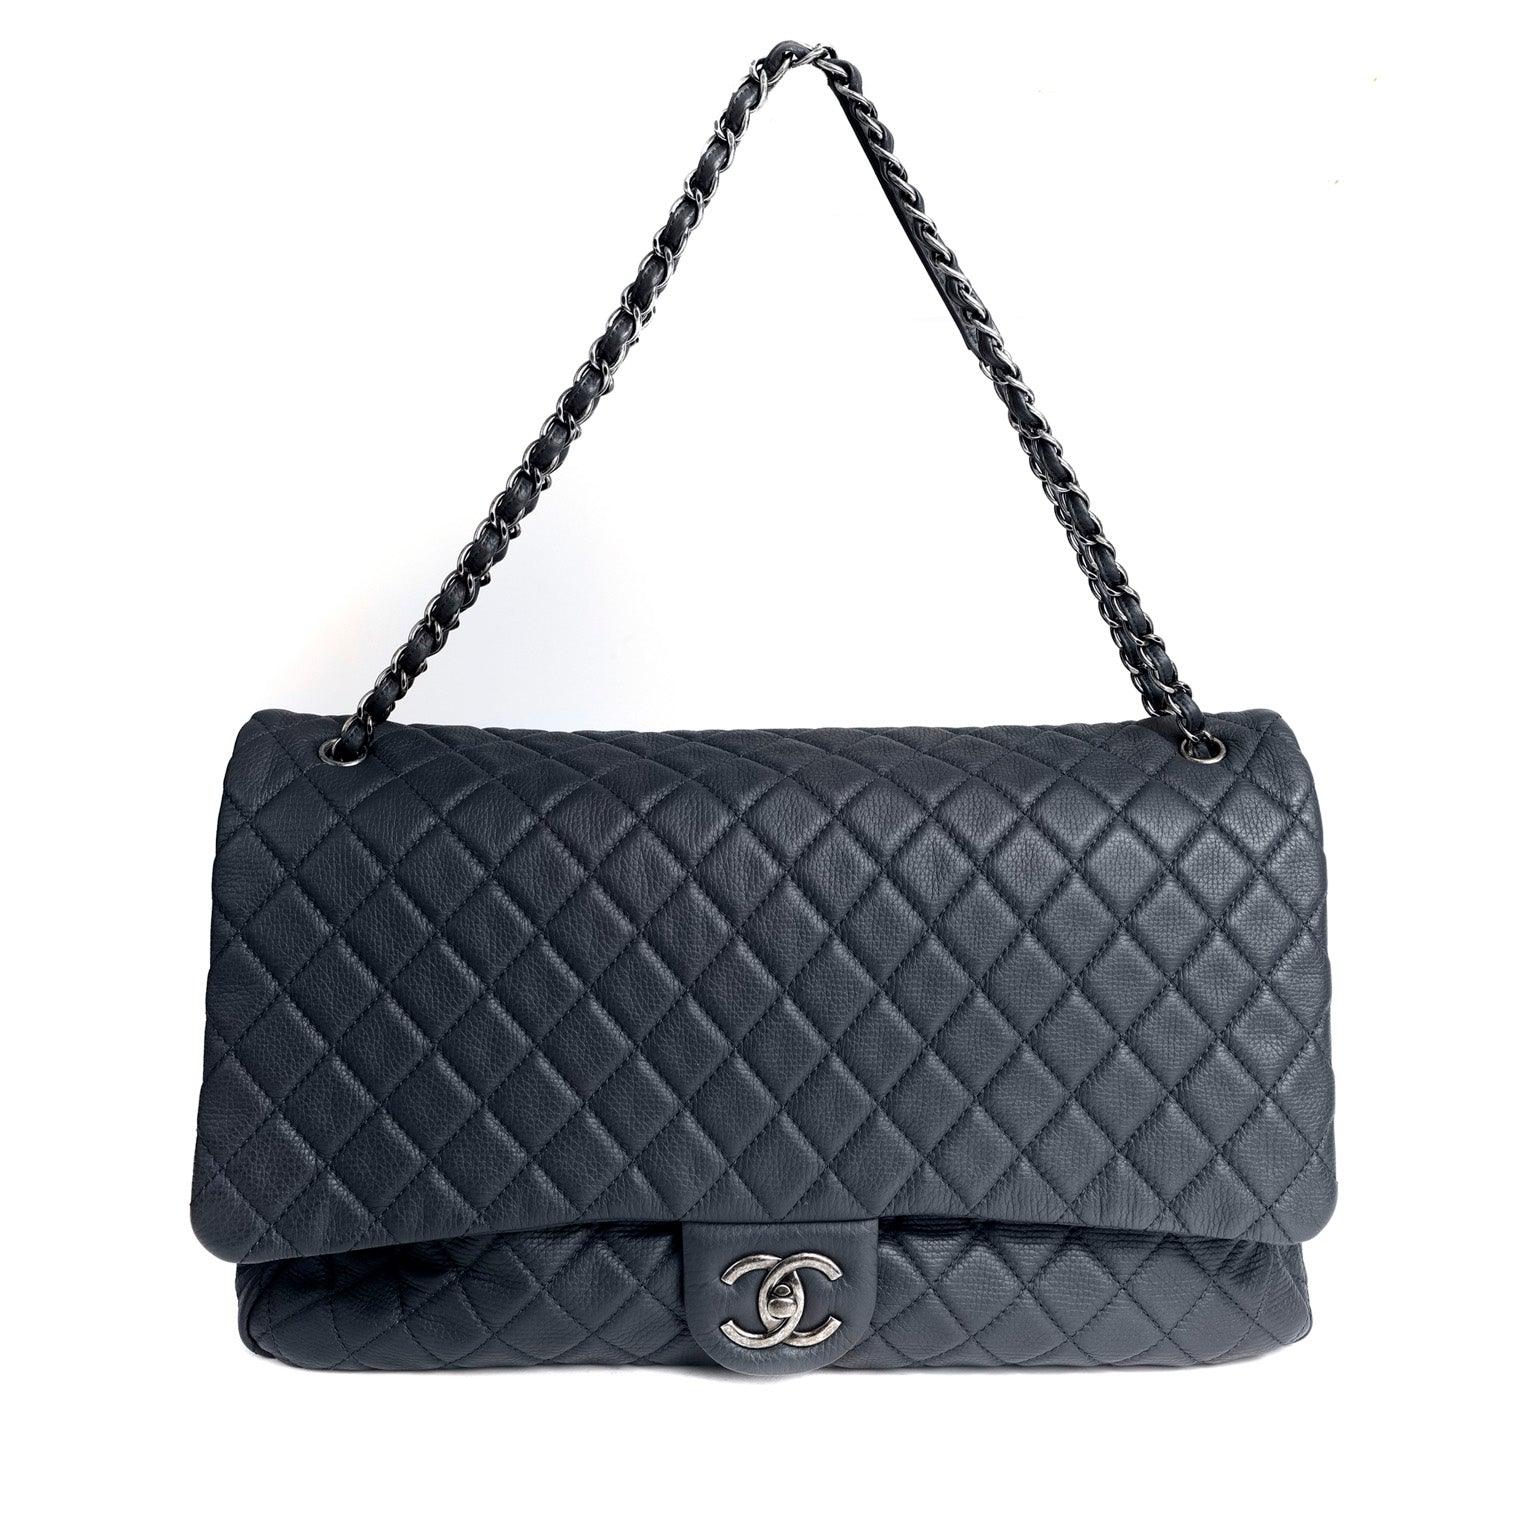 Chanel XXL travel flap bag Do you want to travel with it